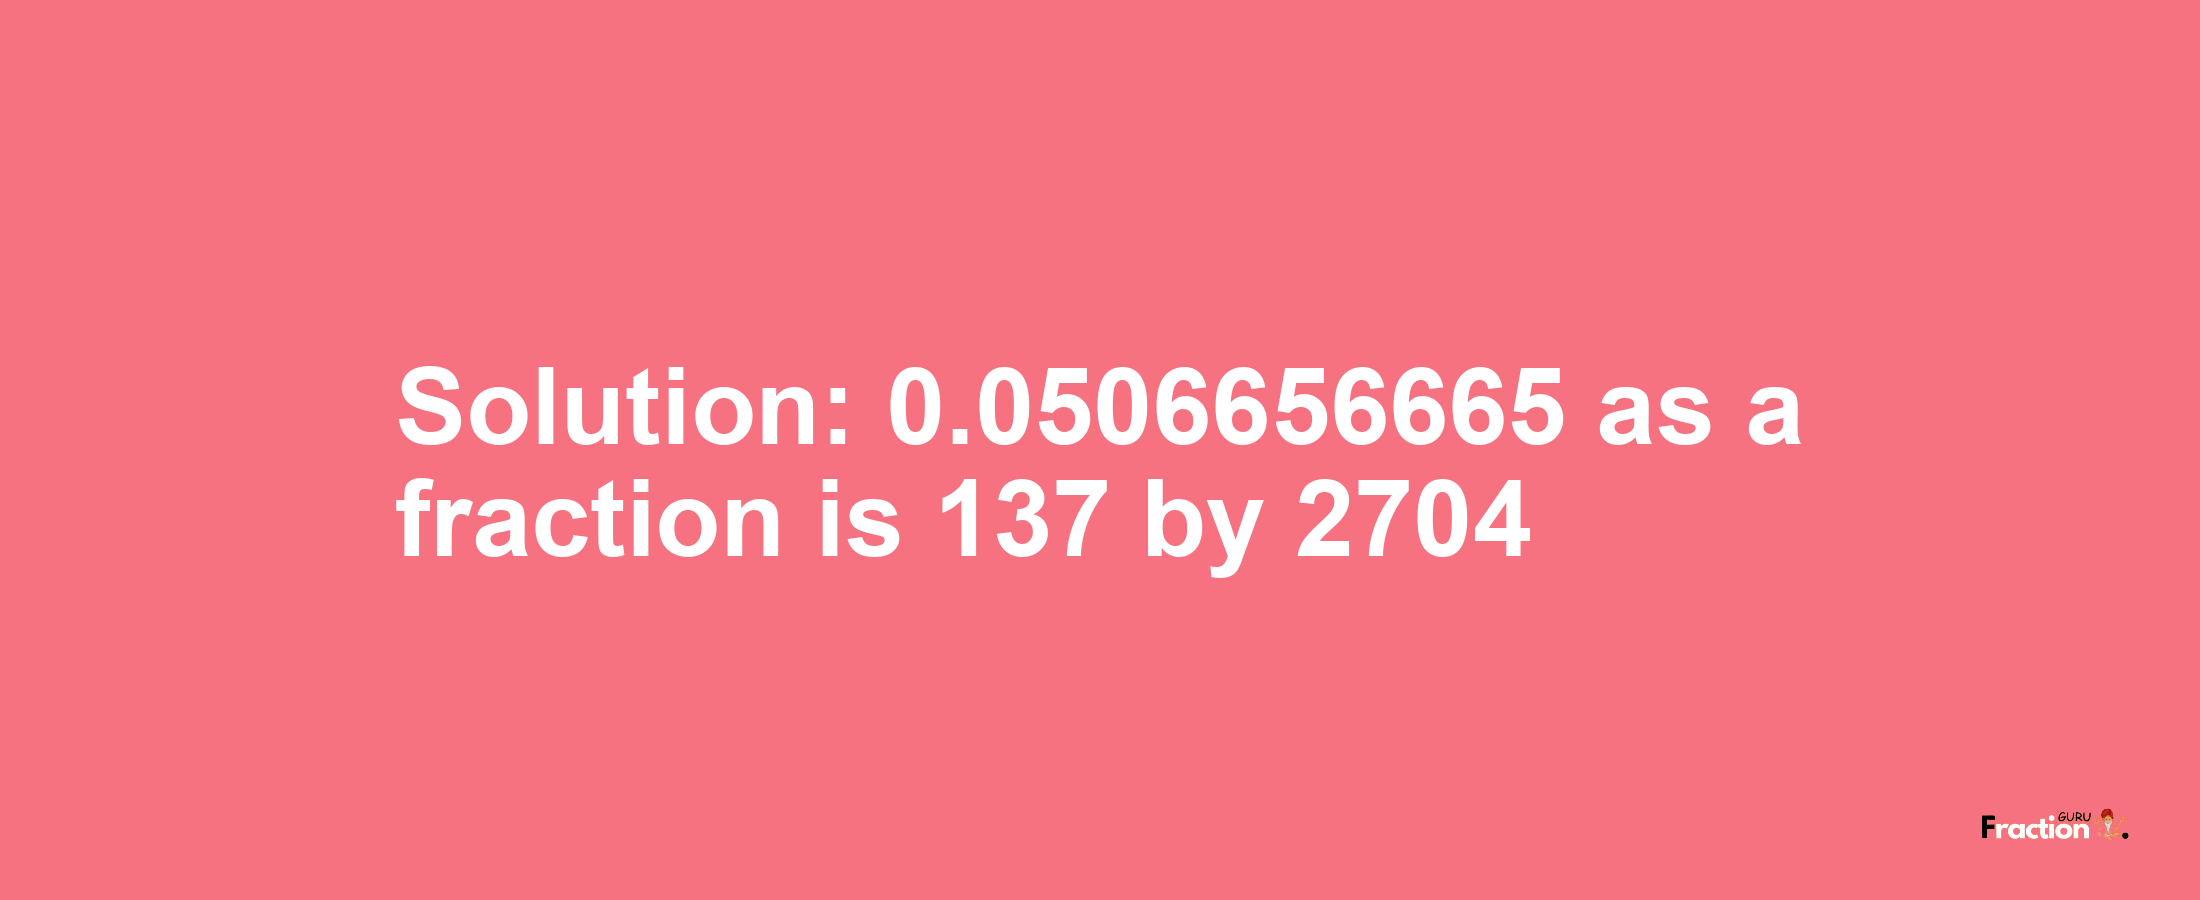 Solution:0.0506656665 as a fraction is 137/2704